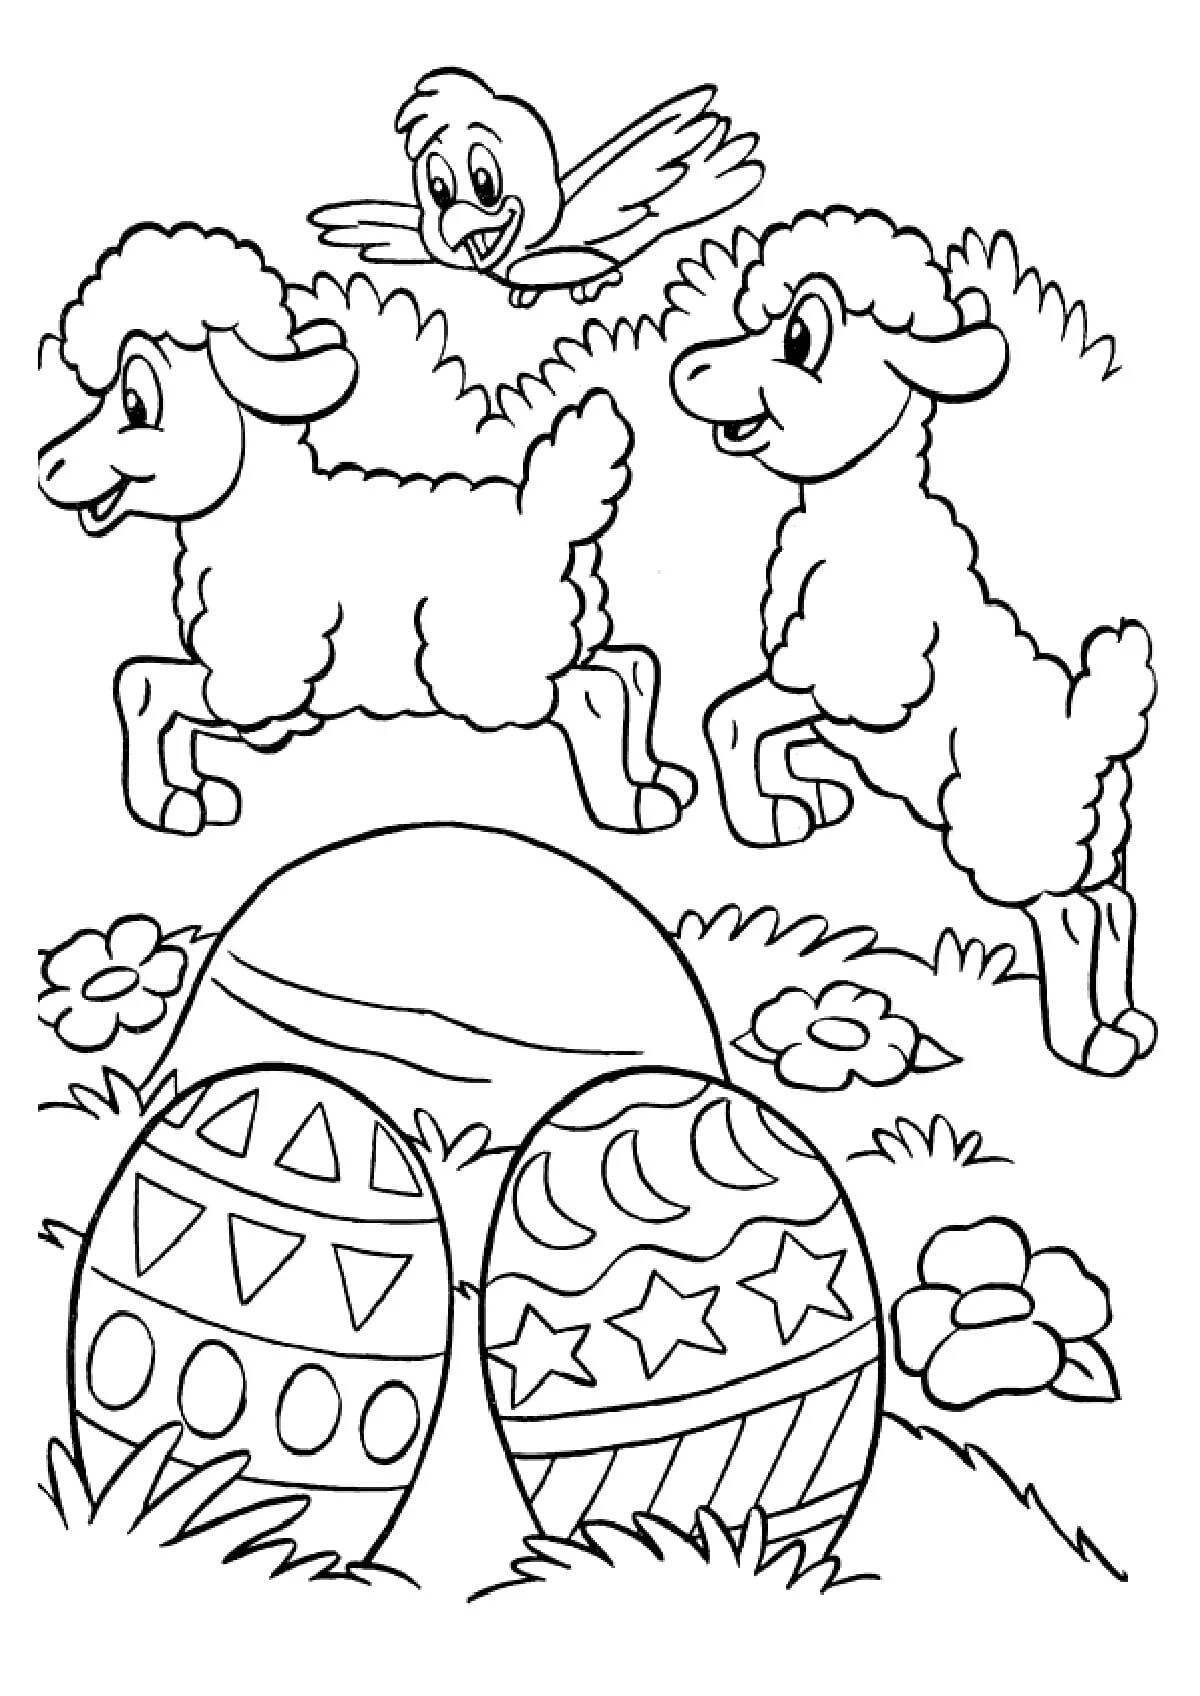 Playful coloring of easter symbols